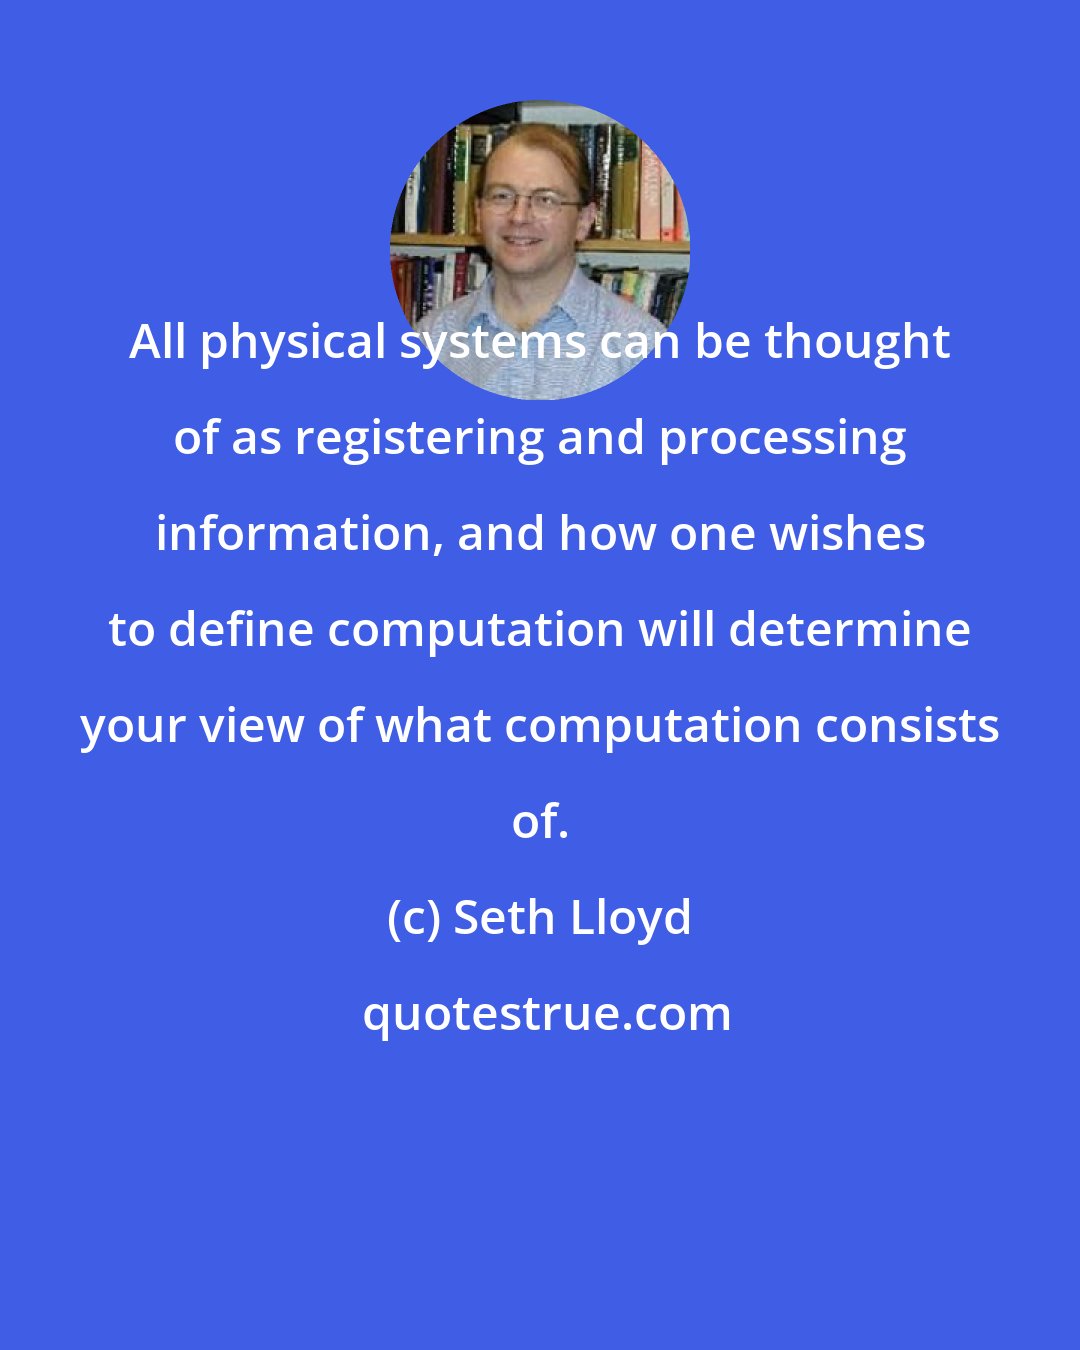 Seth Lloyd: All physical systems can be thought of as registering and processing information, and how one wishes to define computation will determine your view of what computation consists of.